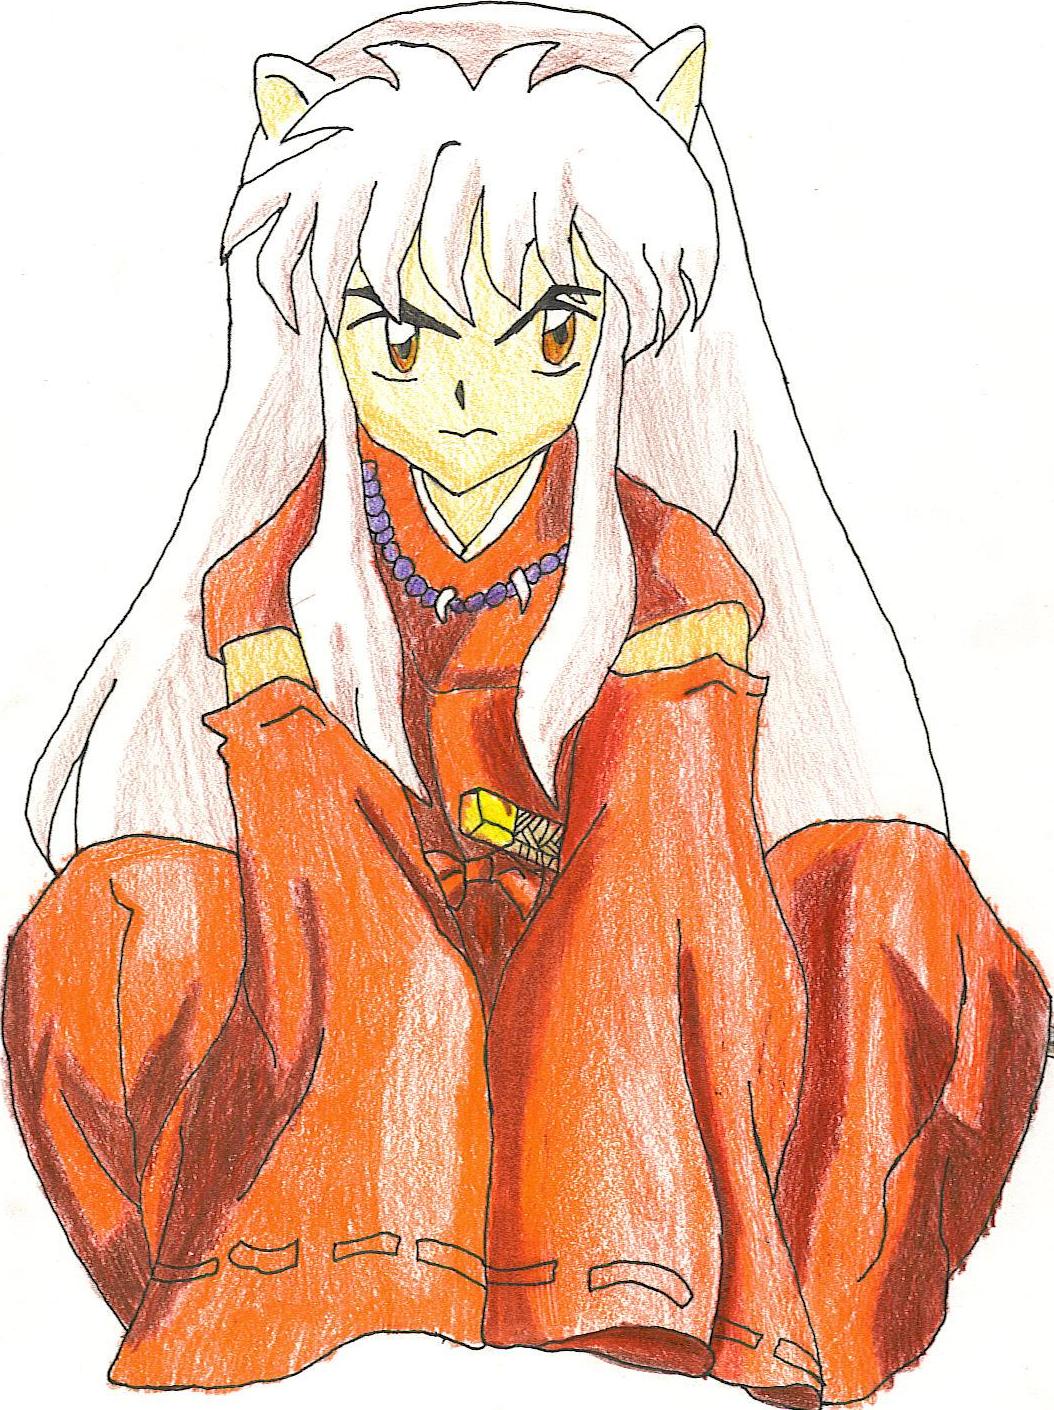 Inuyasha(rquest from LilFireDemon) by Inuyasha_one